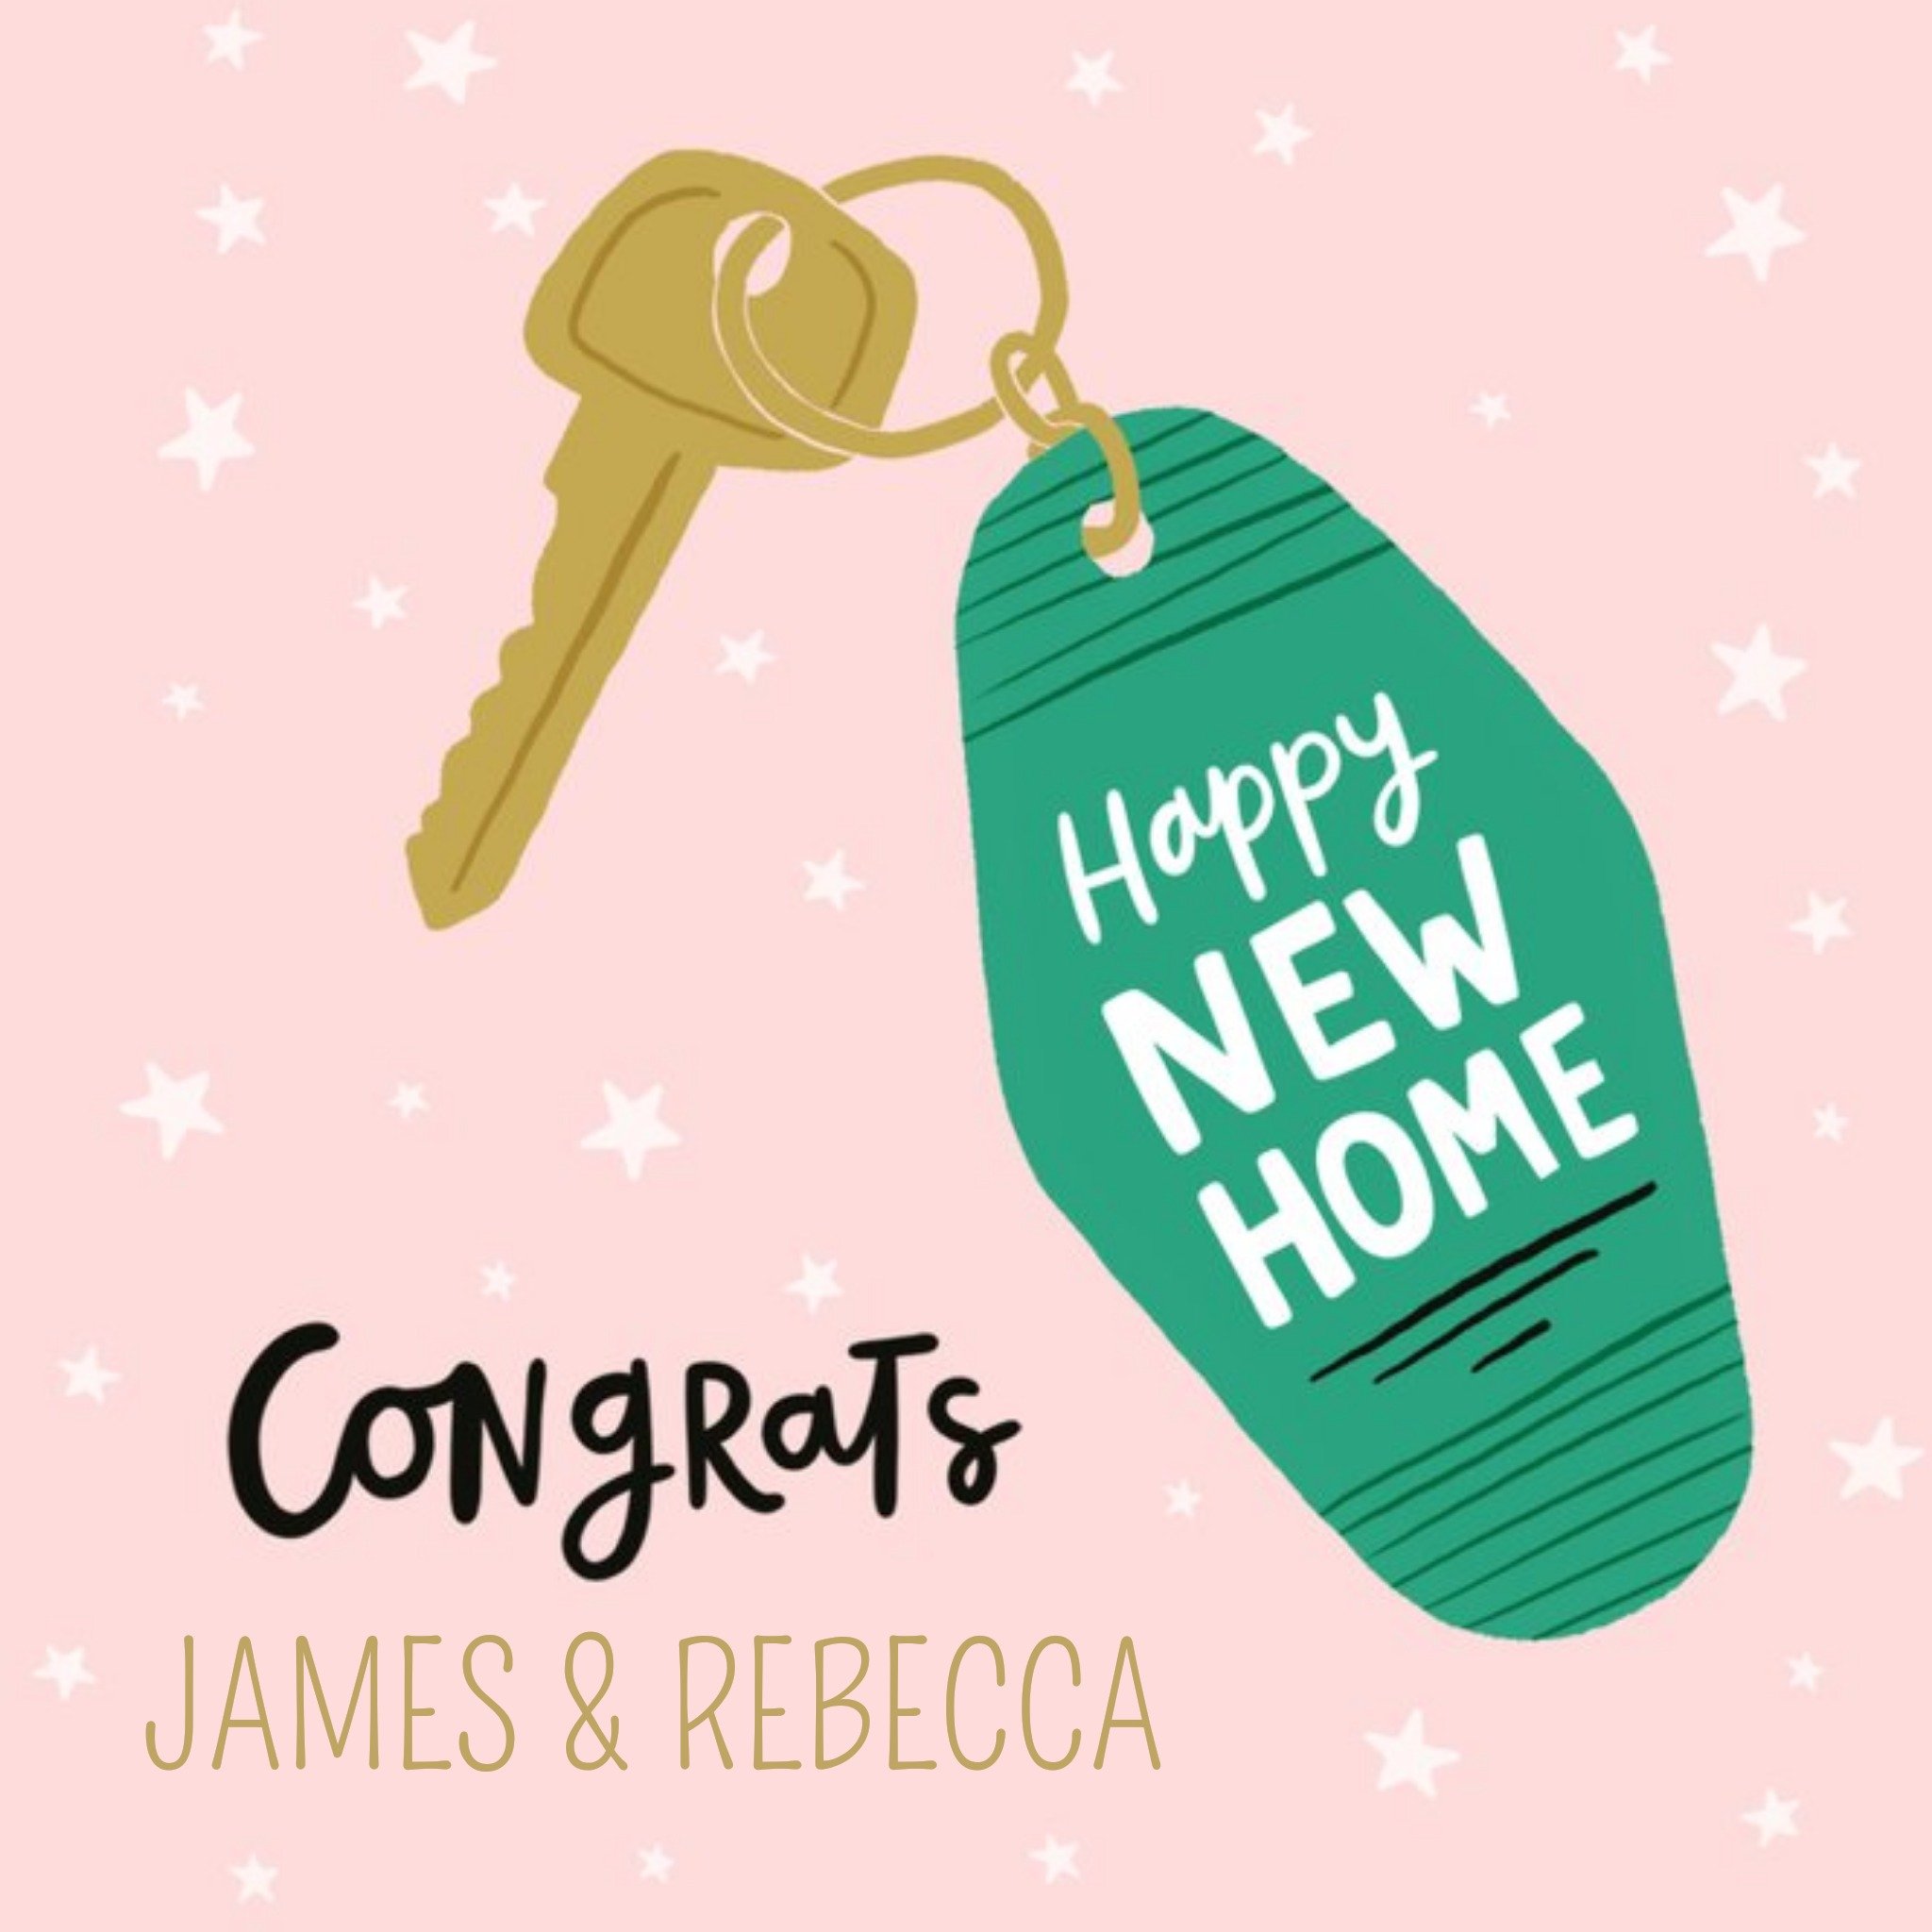 Moonpig Illustrated House Key New Home Card, Square